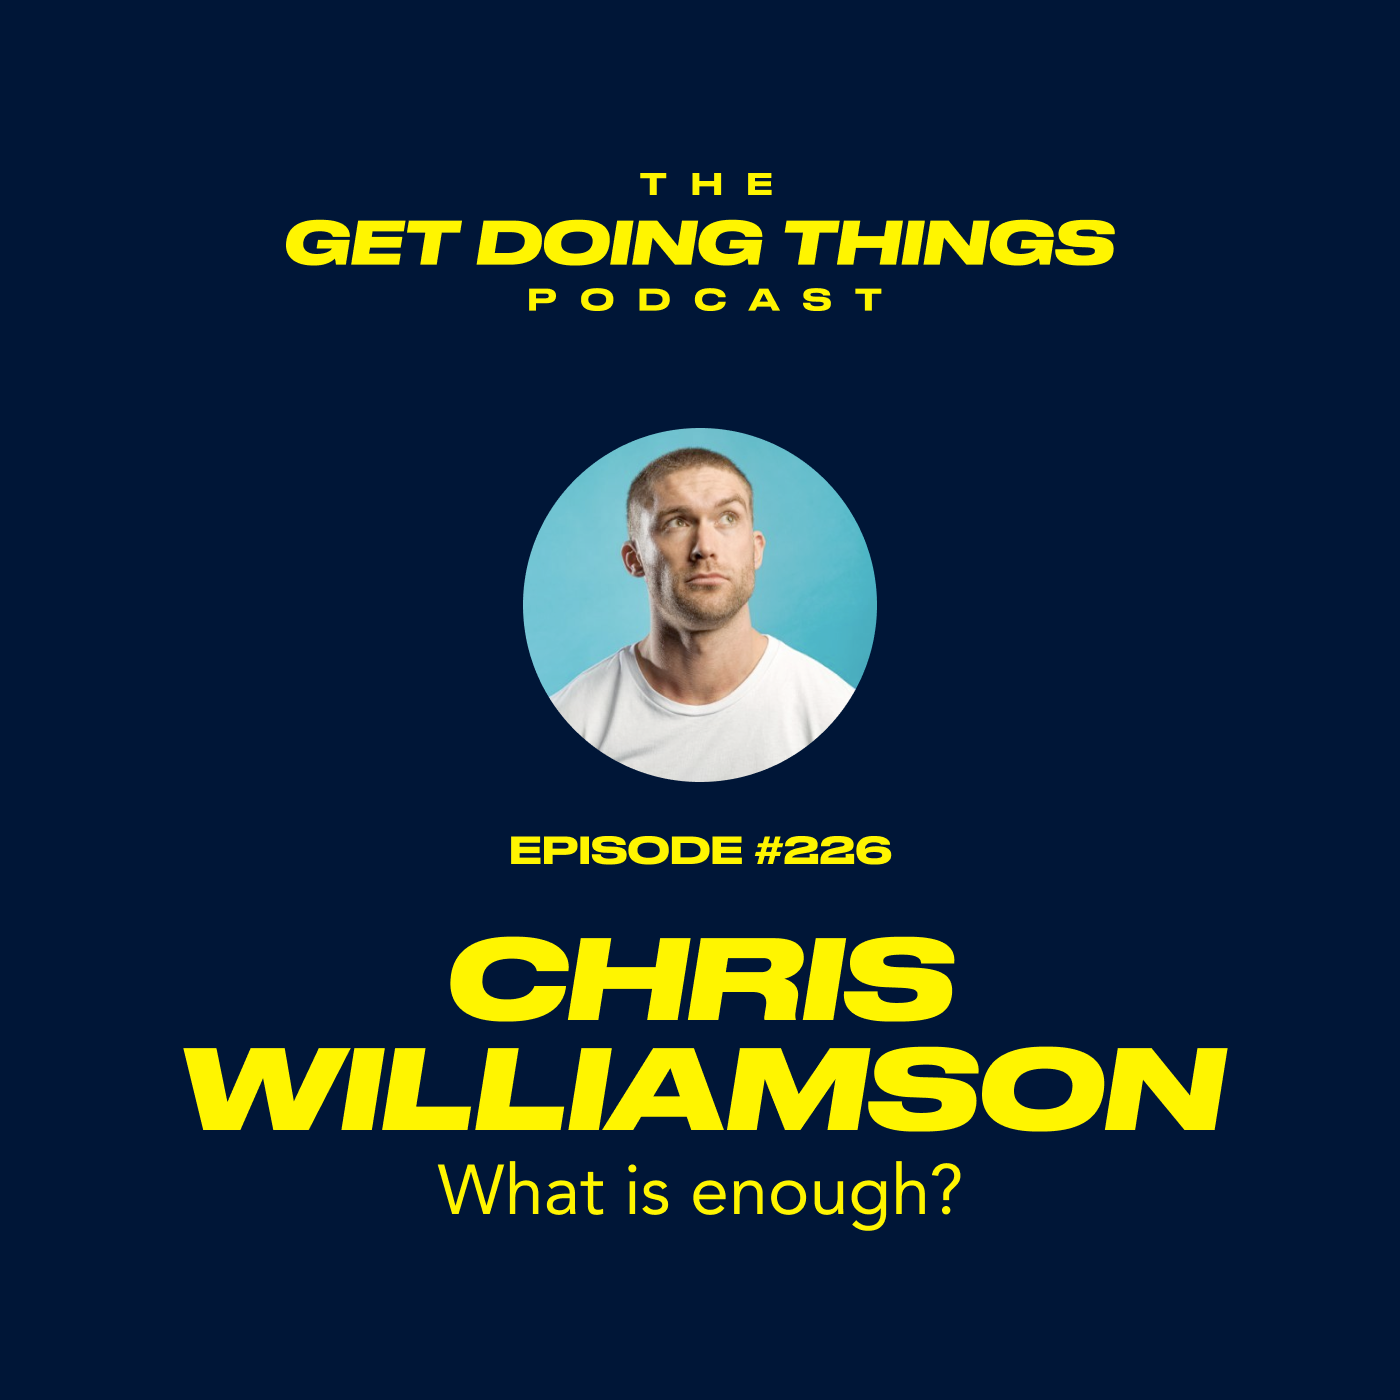 Chris Williamson - What is enough?